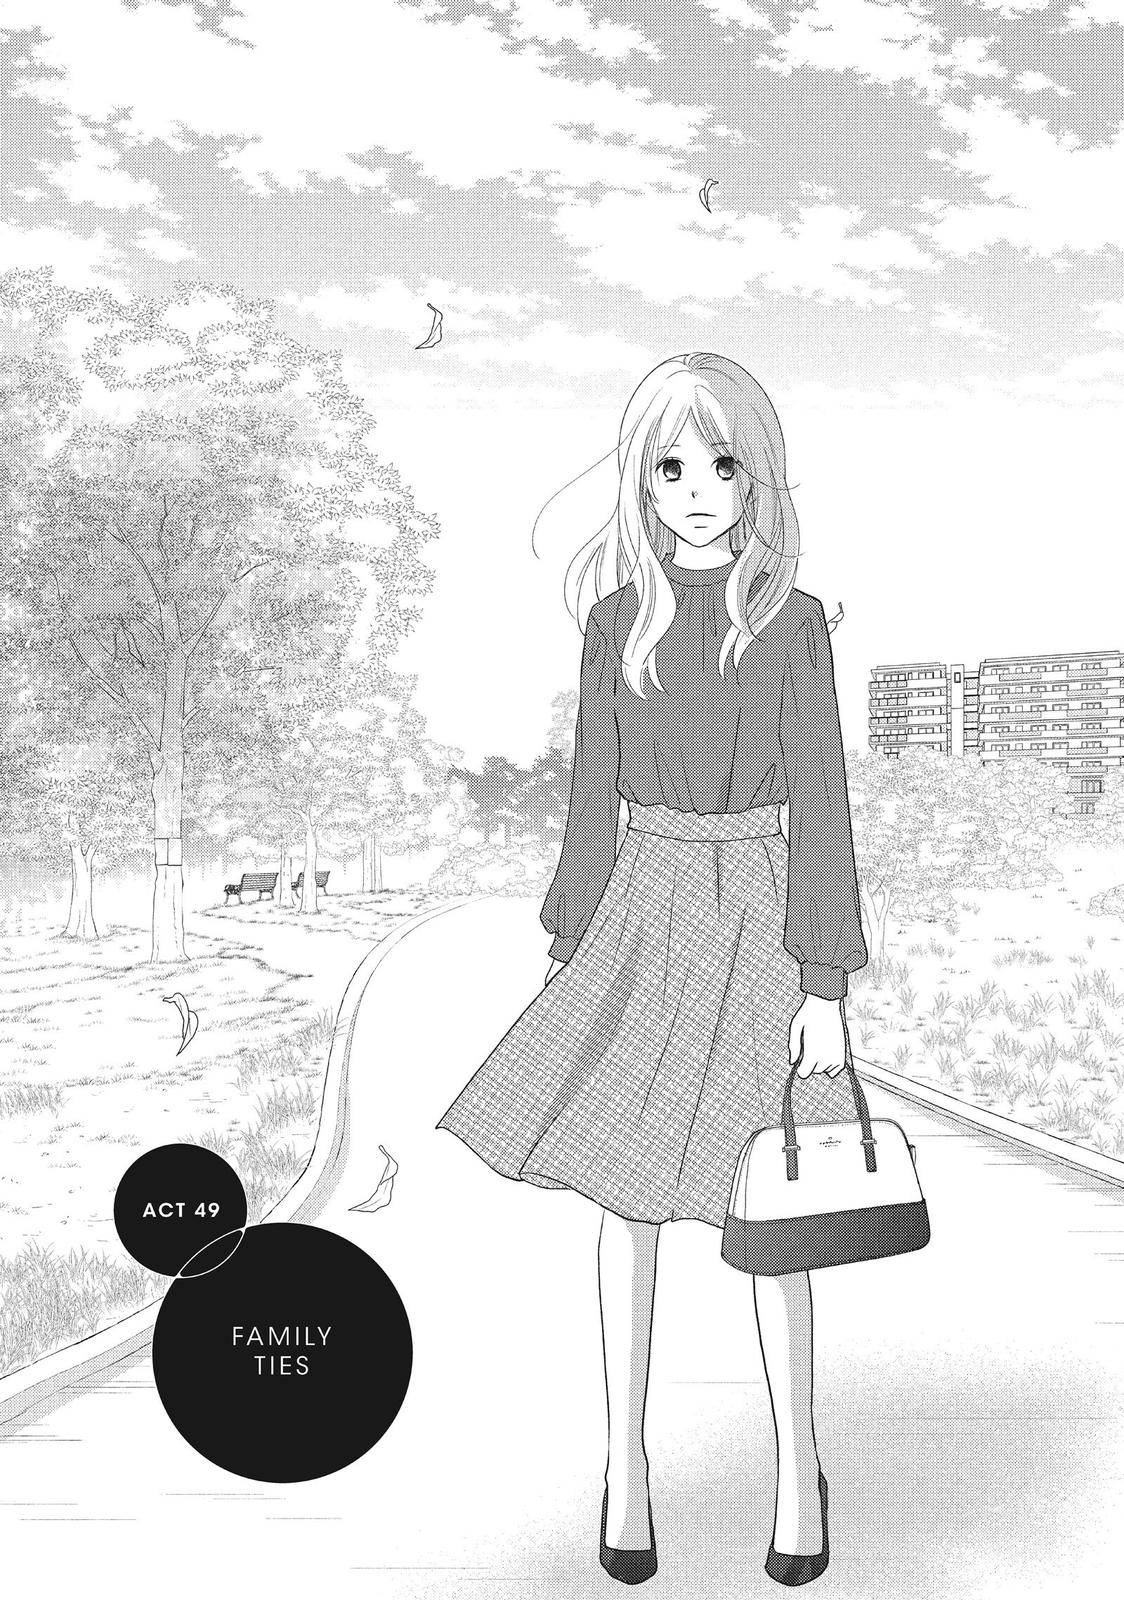 Perfect World (ARUGA Rie) - chapter 50 - #3